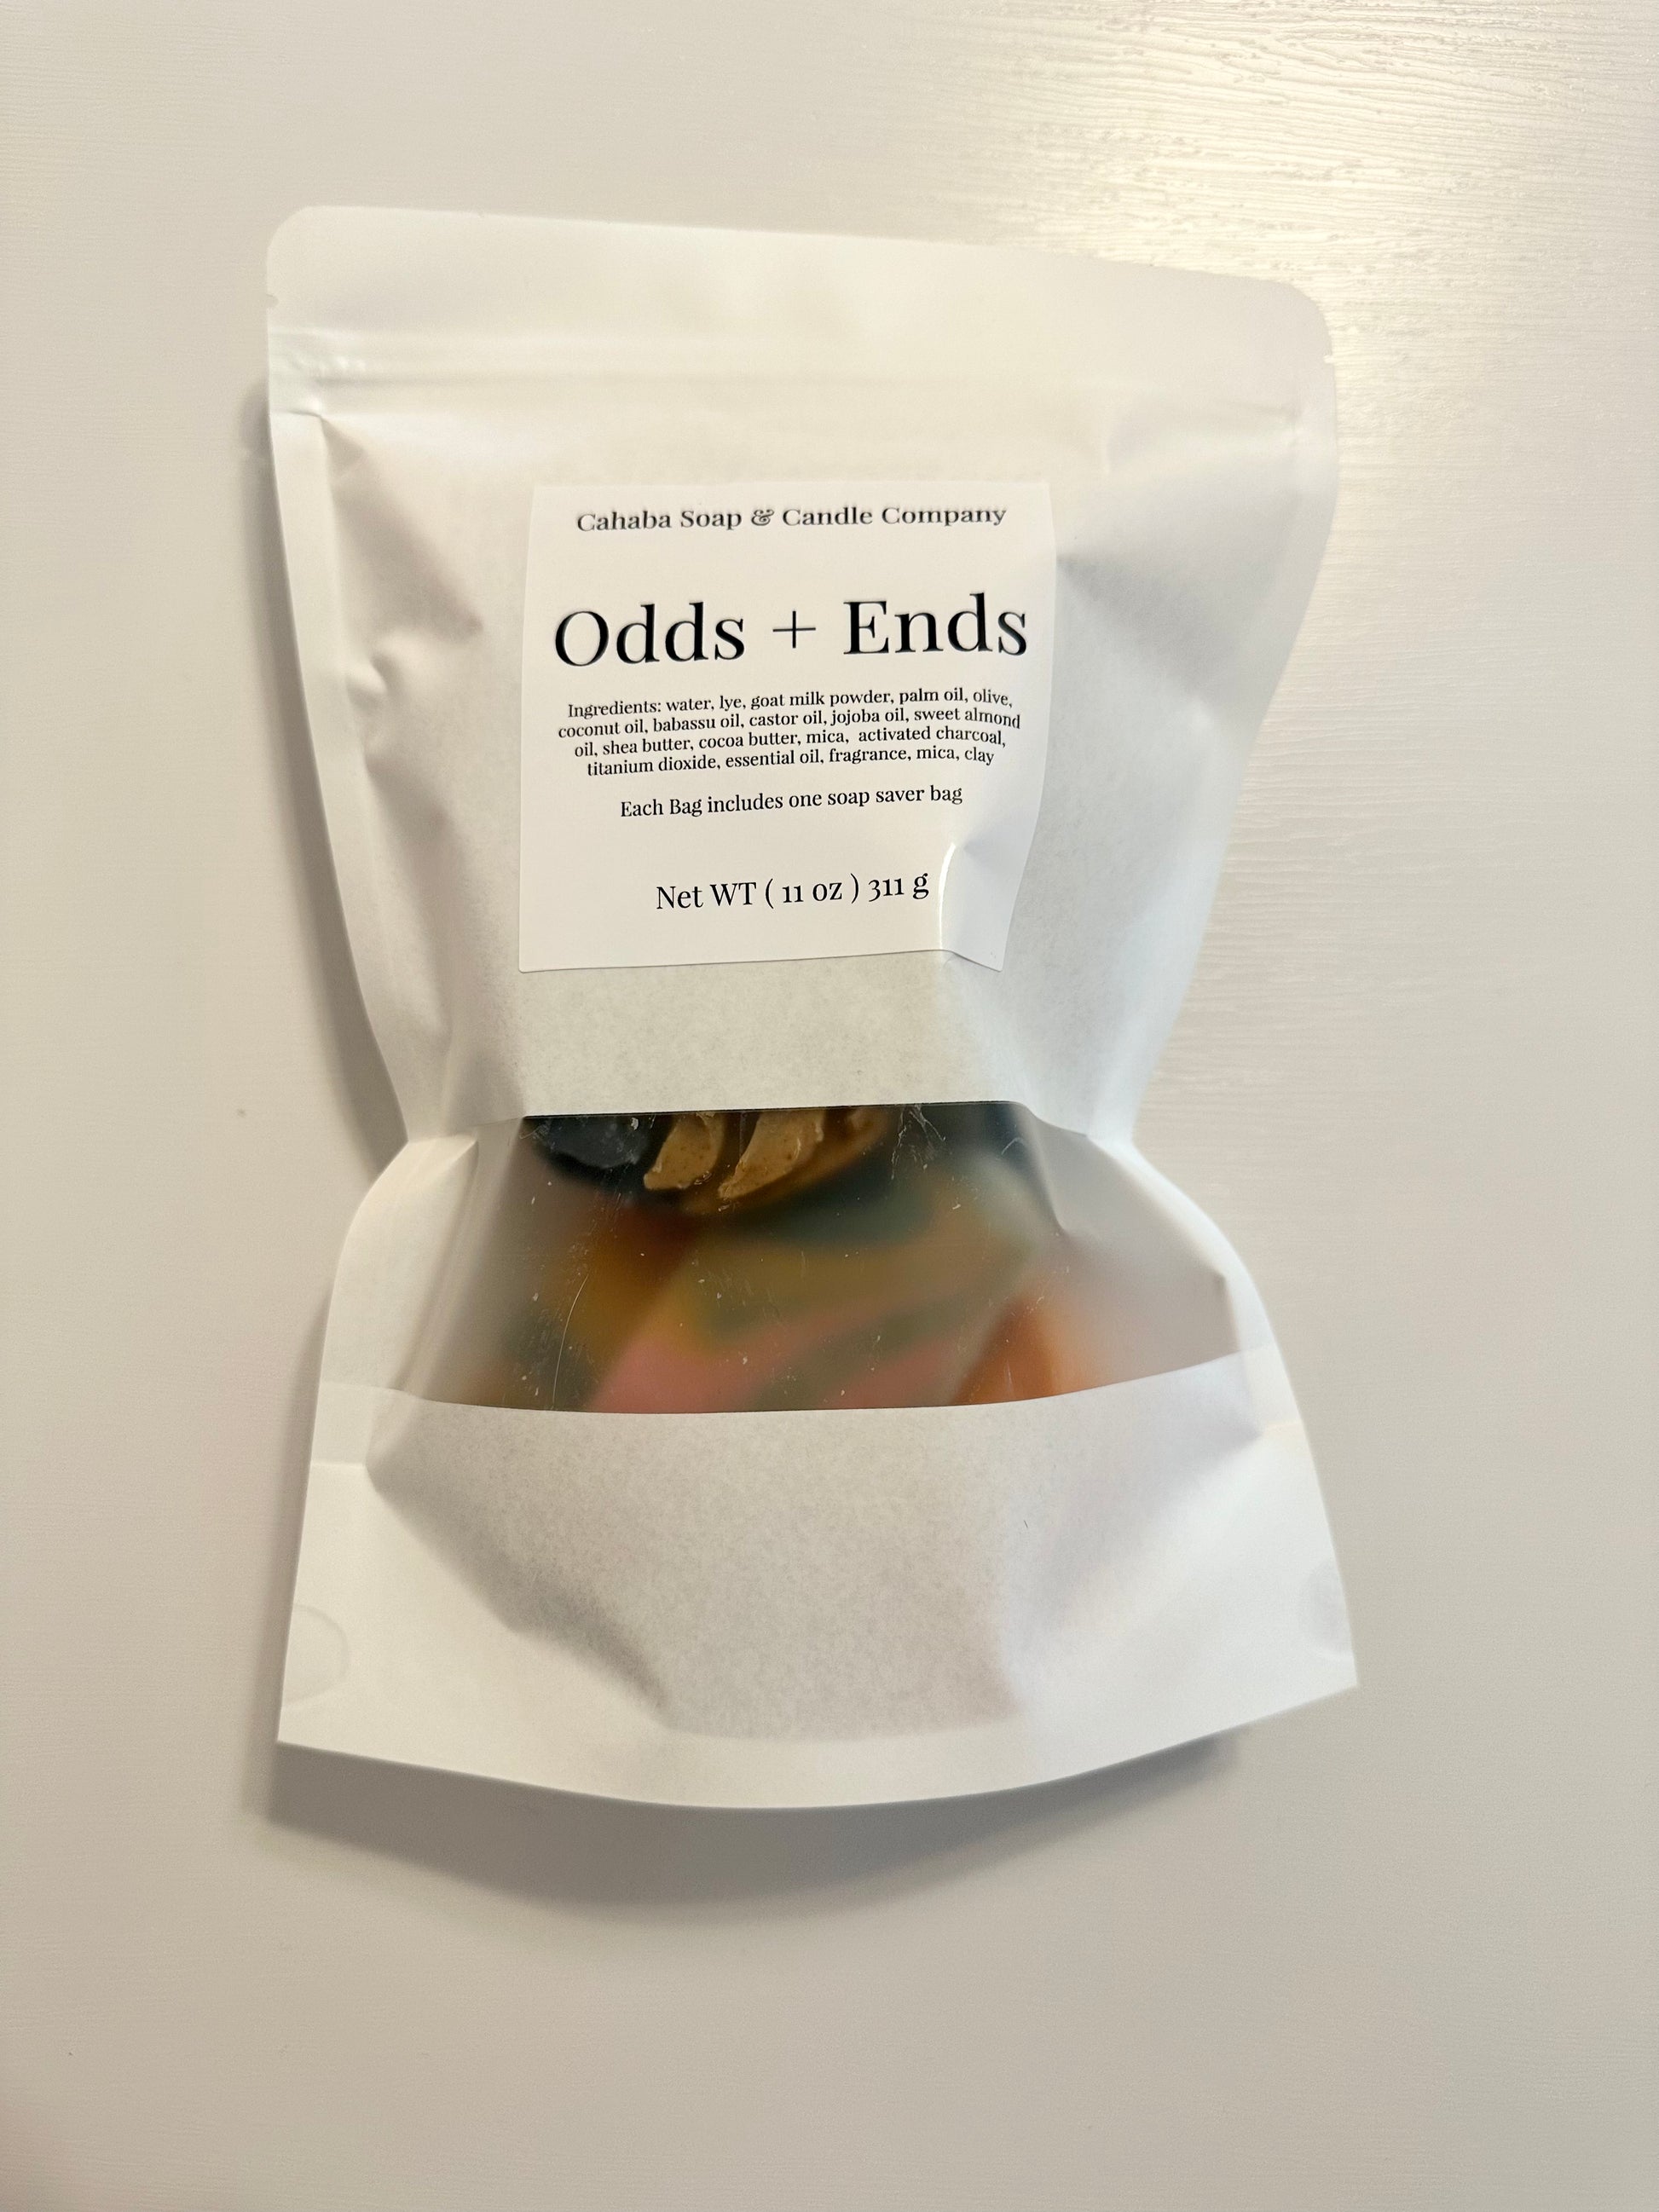 Odds + Ends - Cahaba Soap and Candle Company